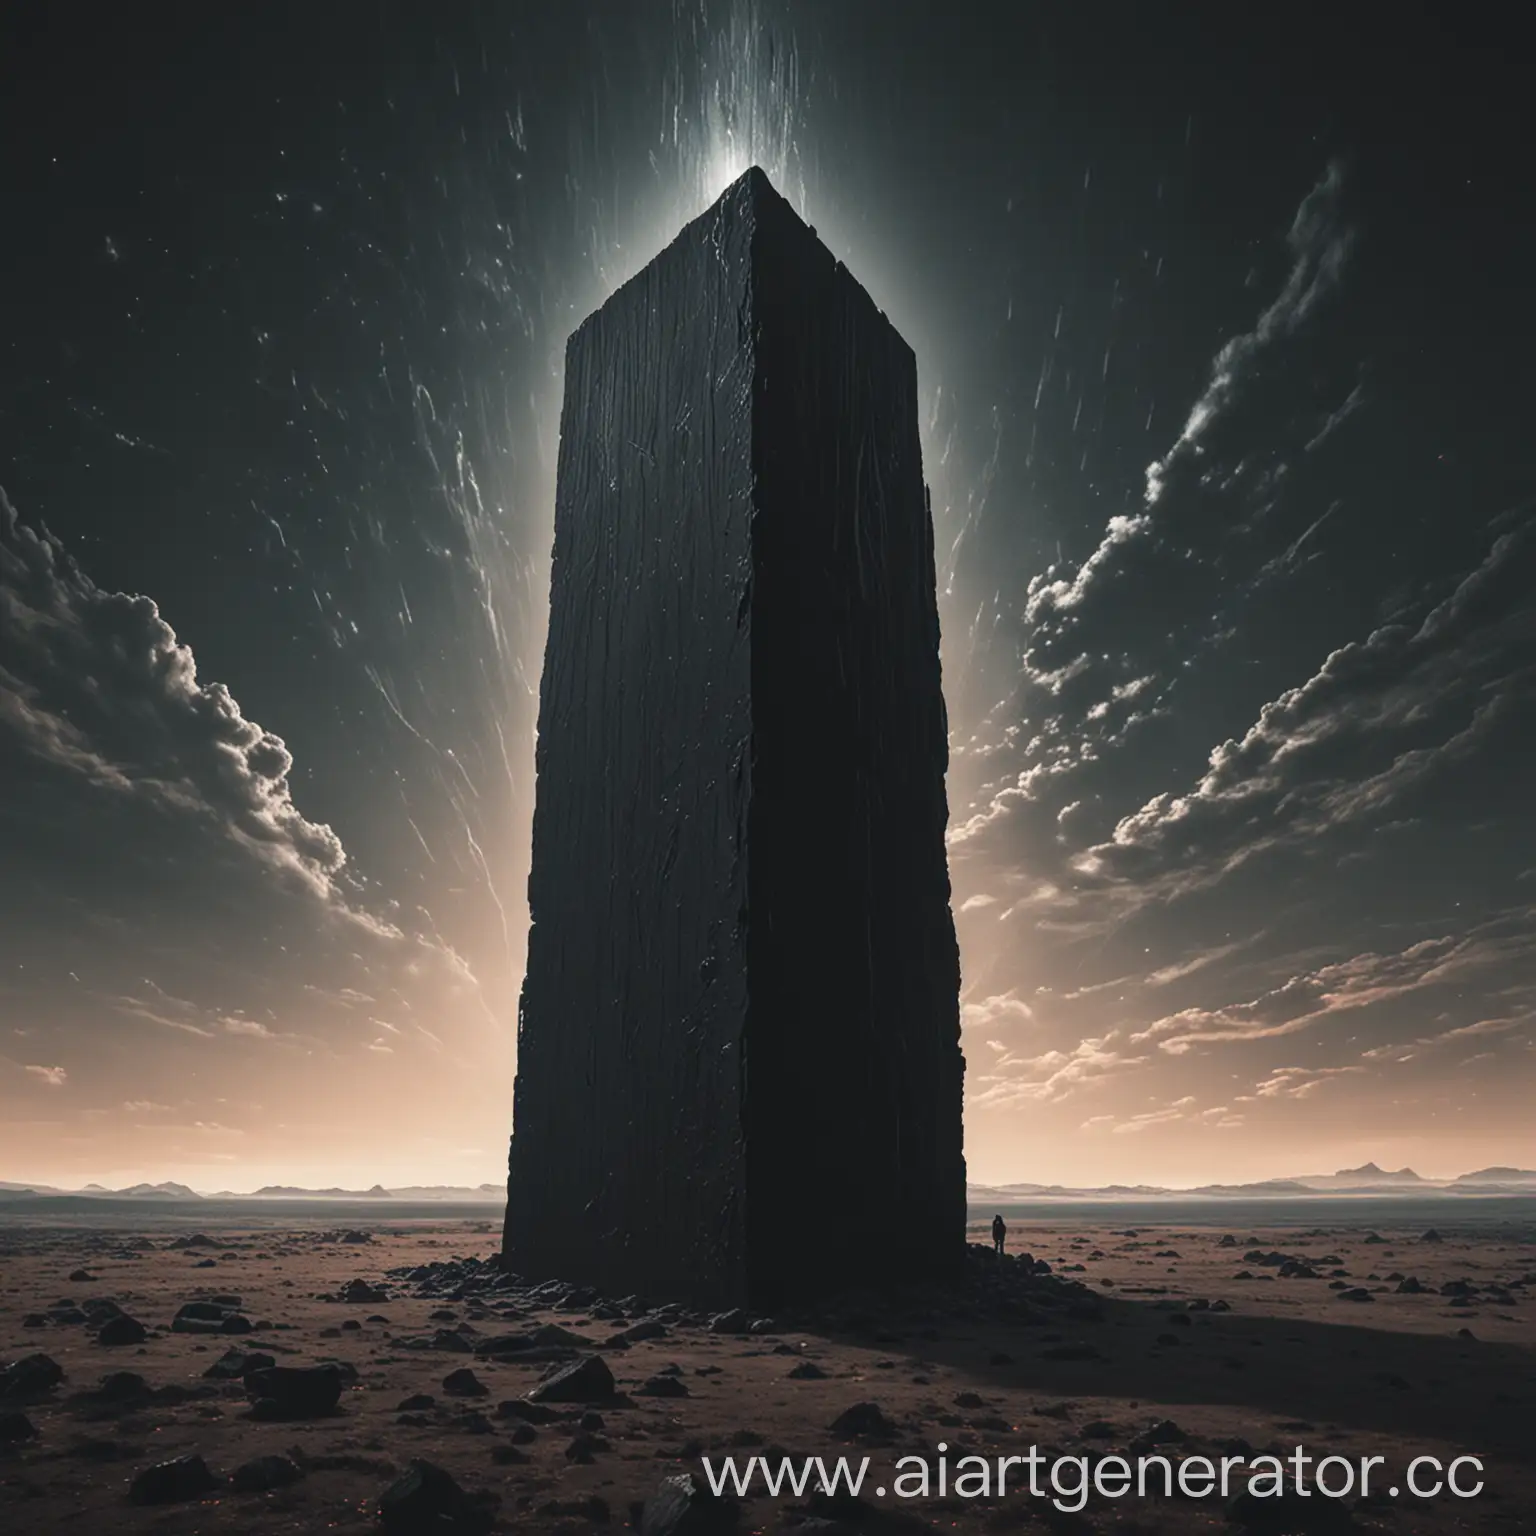 Enigmatic-Monolith-Emerges-in-Surreal-Landscape